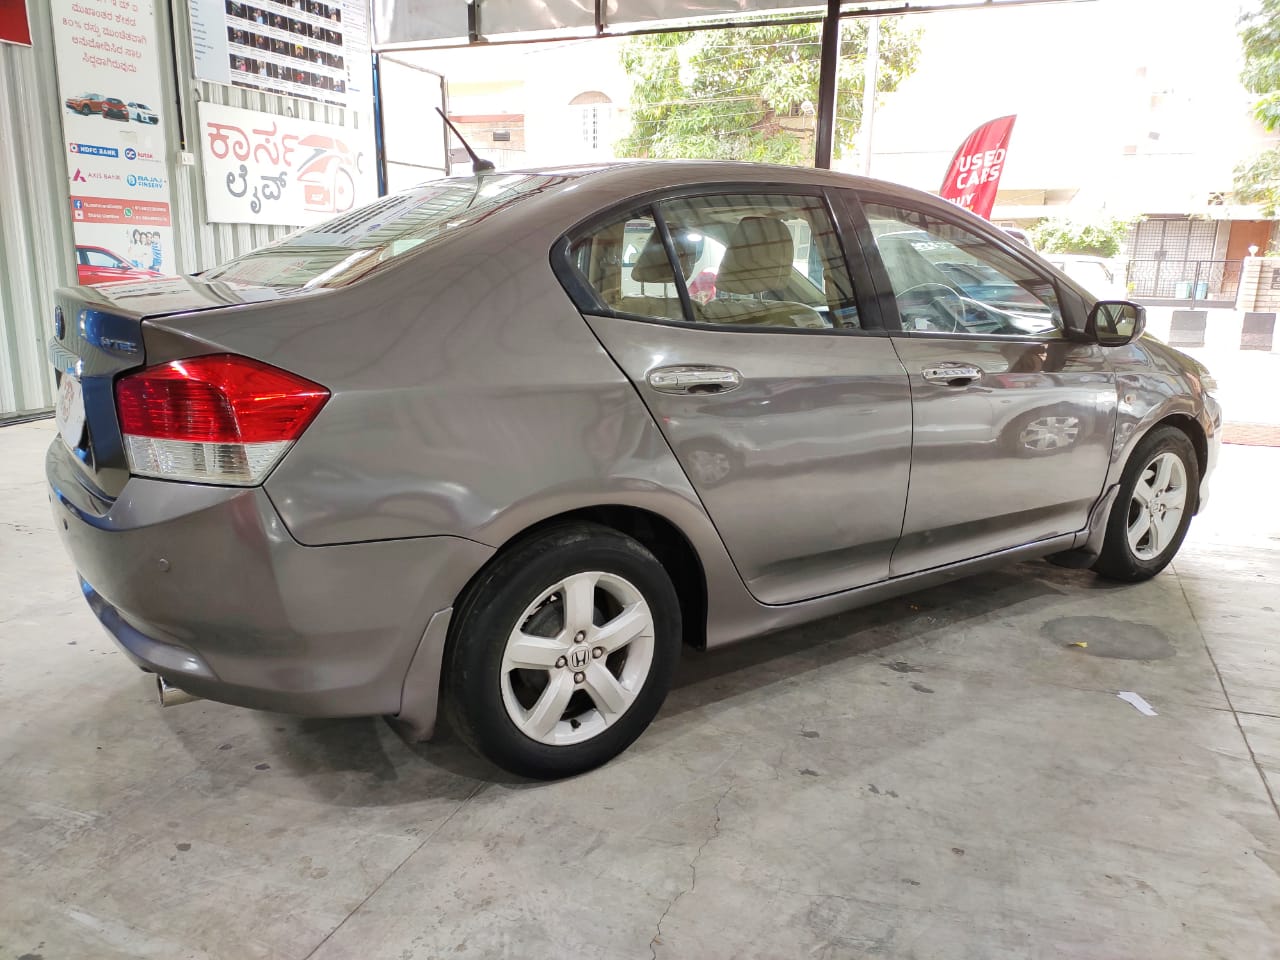 Honda City iVtec VMT 2011 Petrol With Dual Airbags ABS Single owner + Warranty one Year Free ...